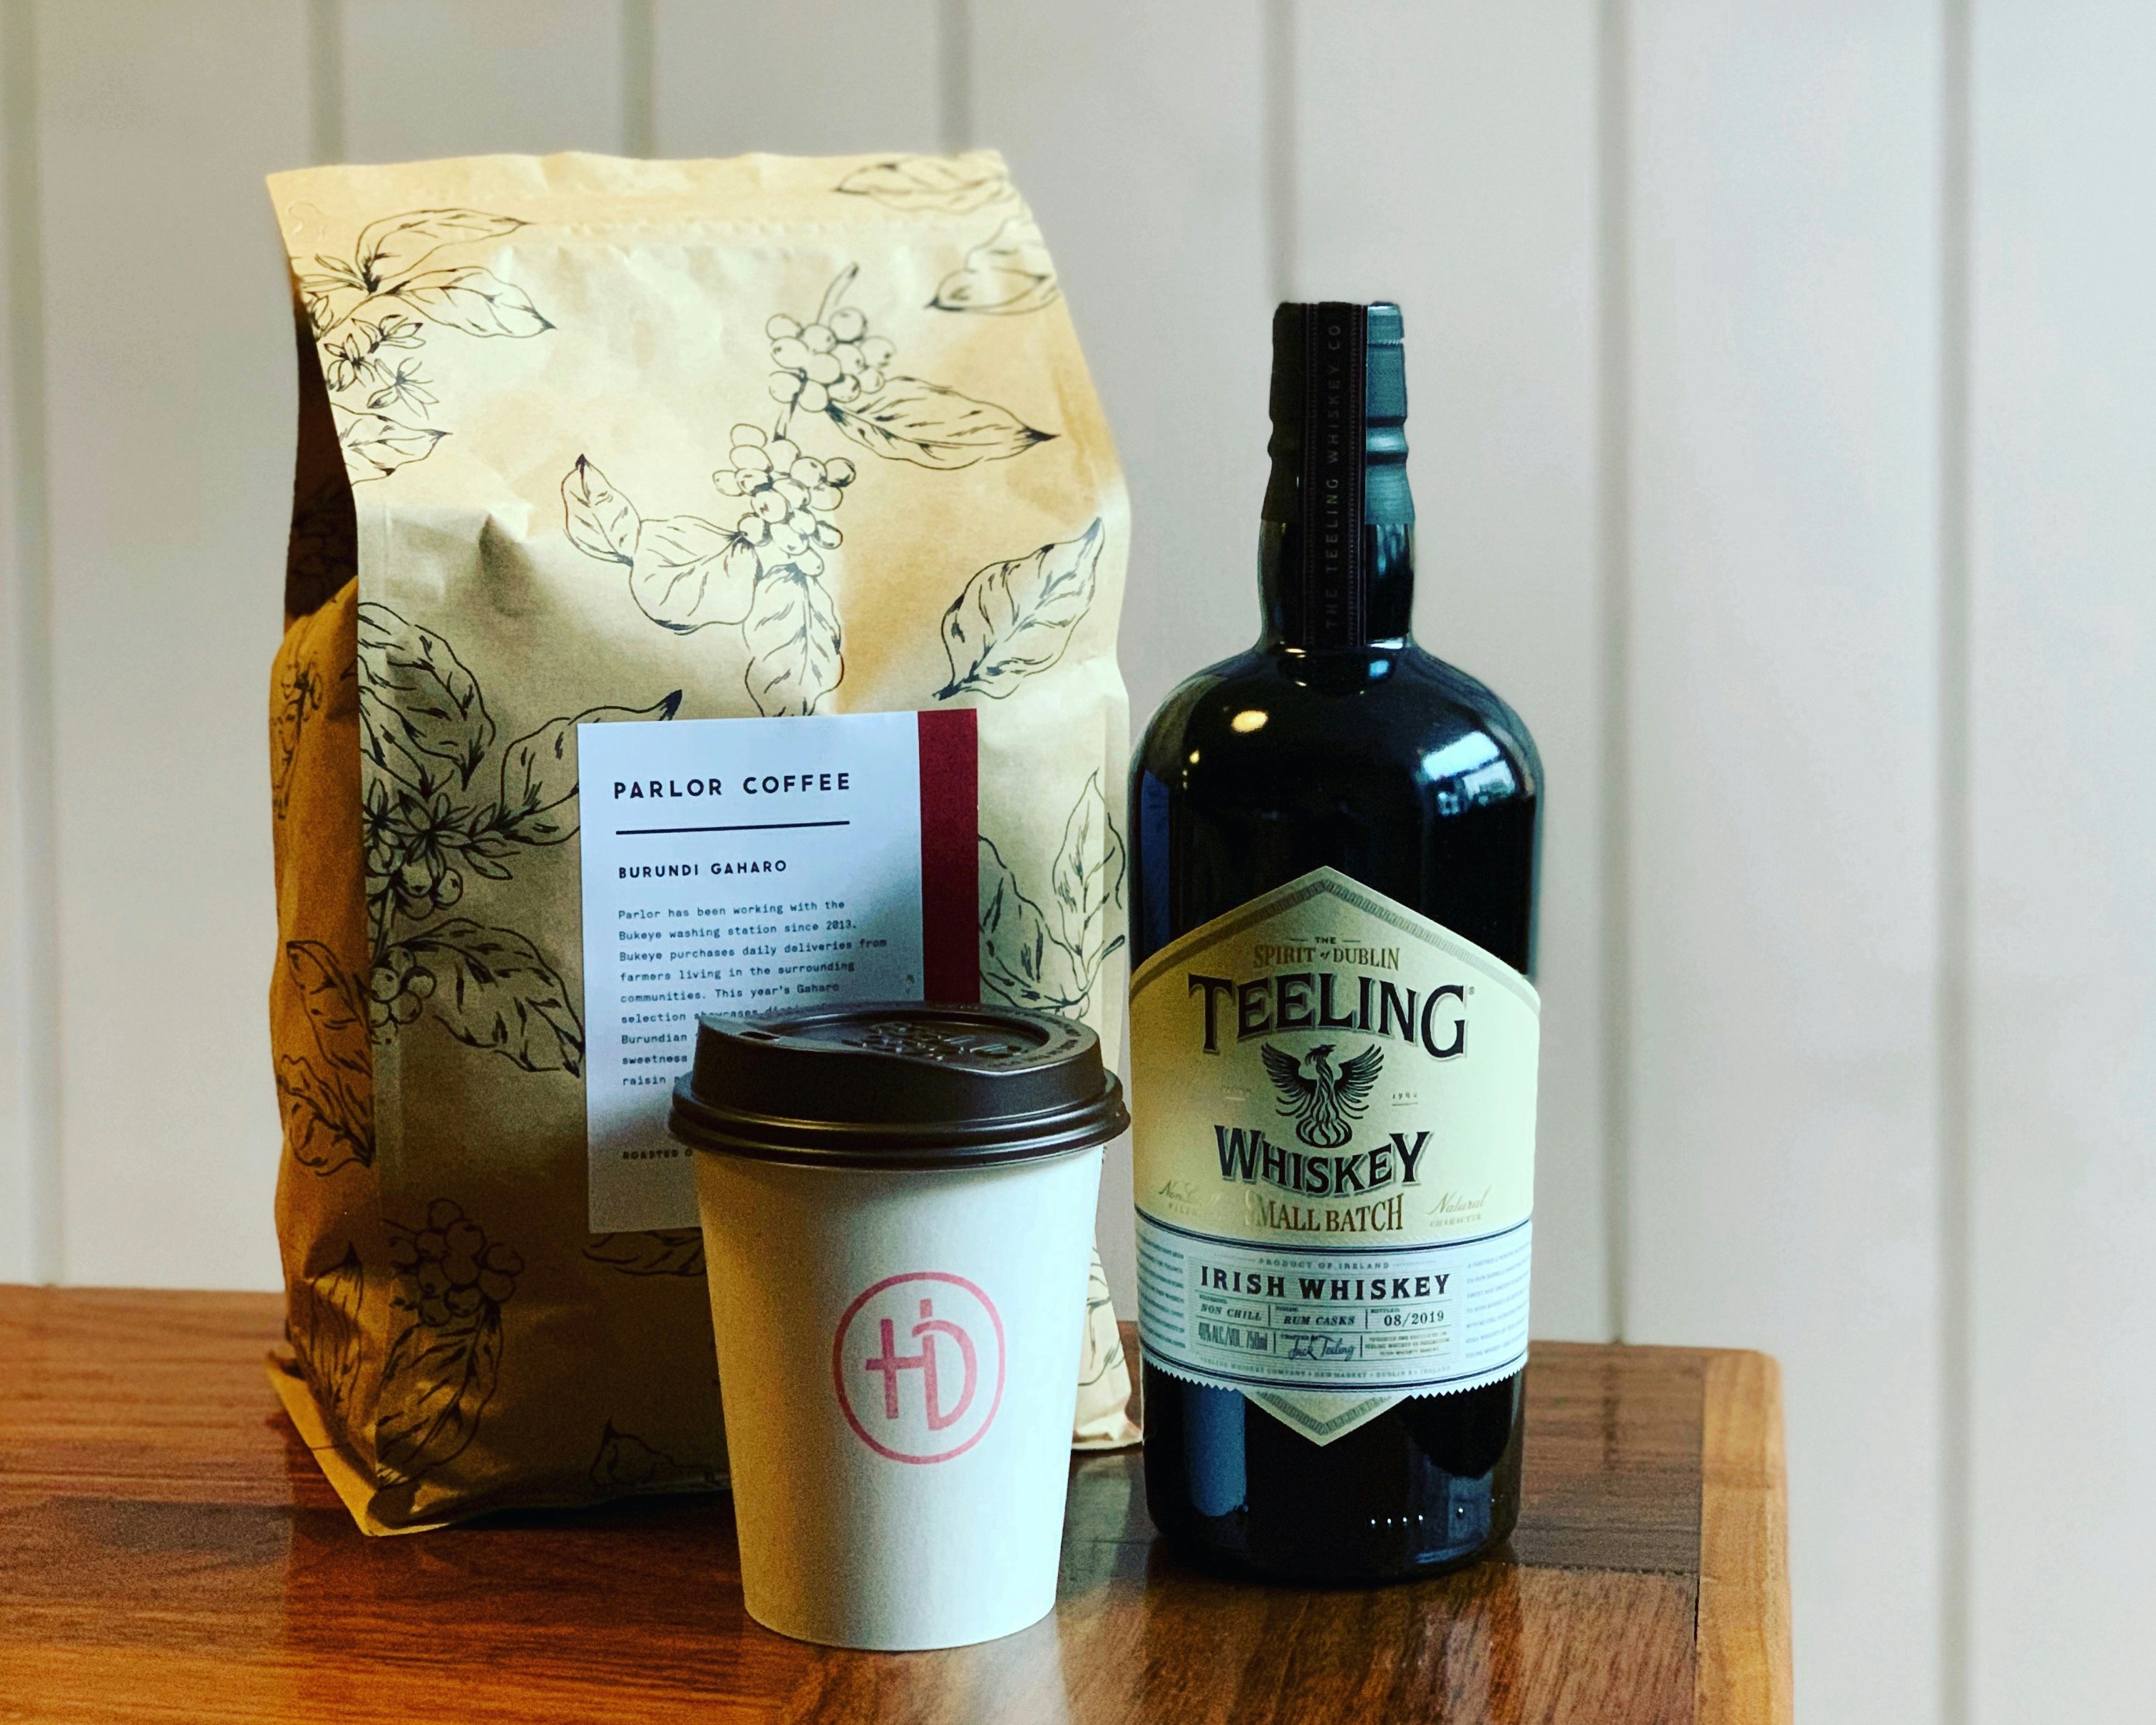 Hunky Dory's Irish coffee to go, with bag of coffee beans and bottle of Telling whiskey